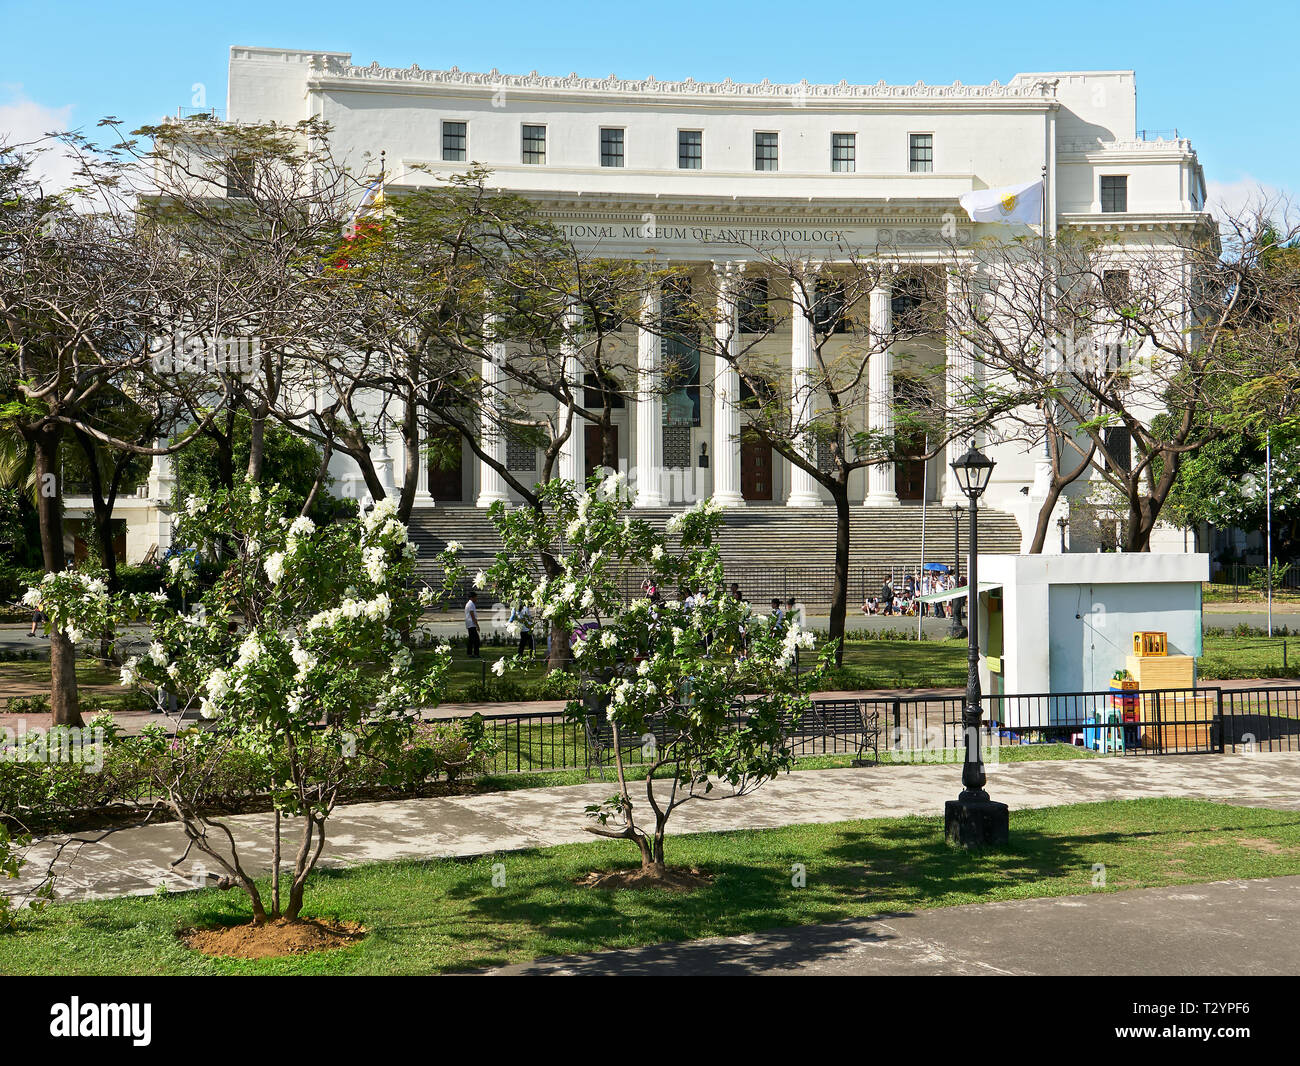 Manila, Philippines: Idyllic scene of the National Museum of Anthropology with flowering trees in front at the Rizal Park Stock Photo